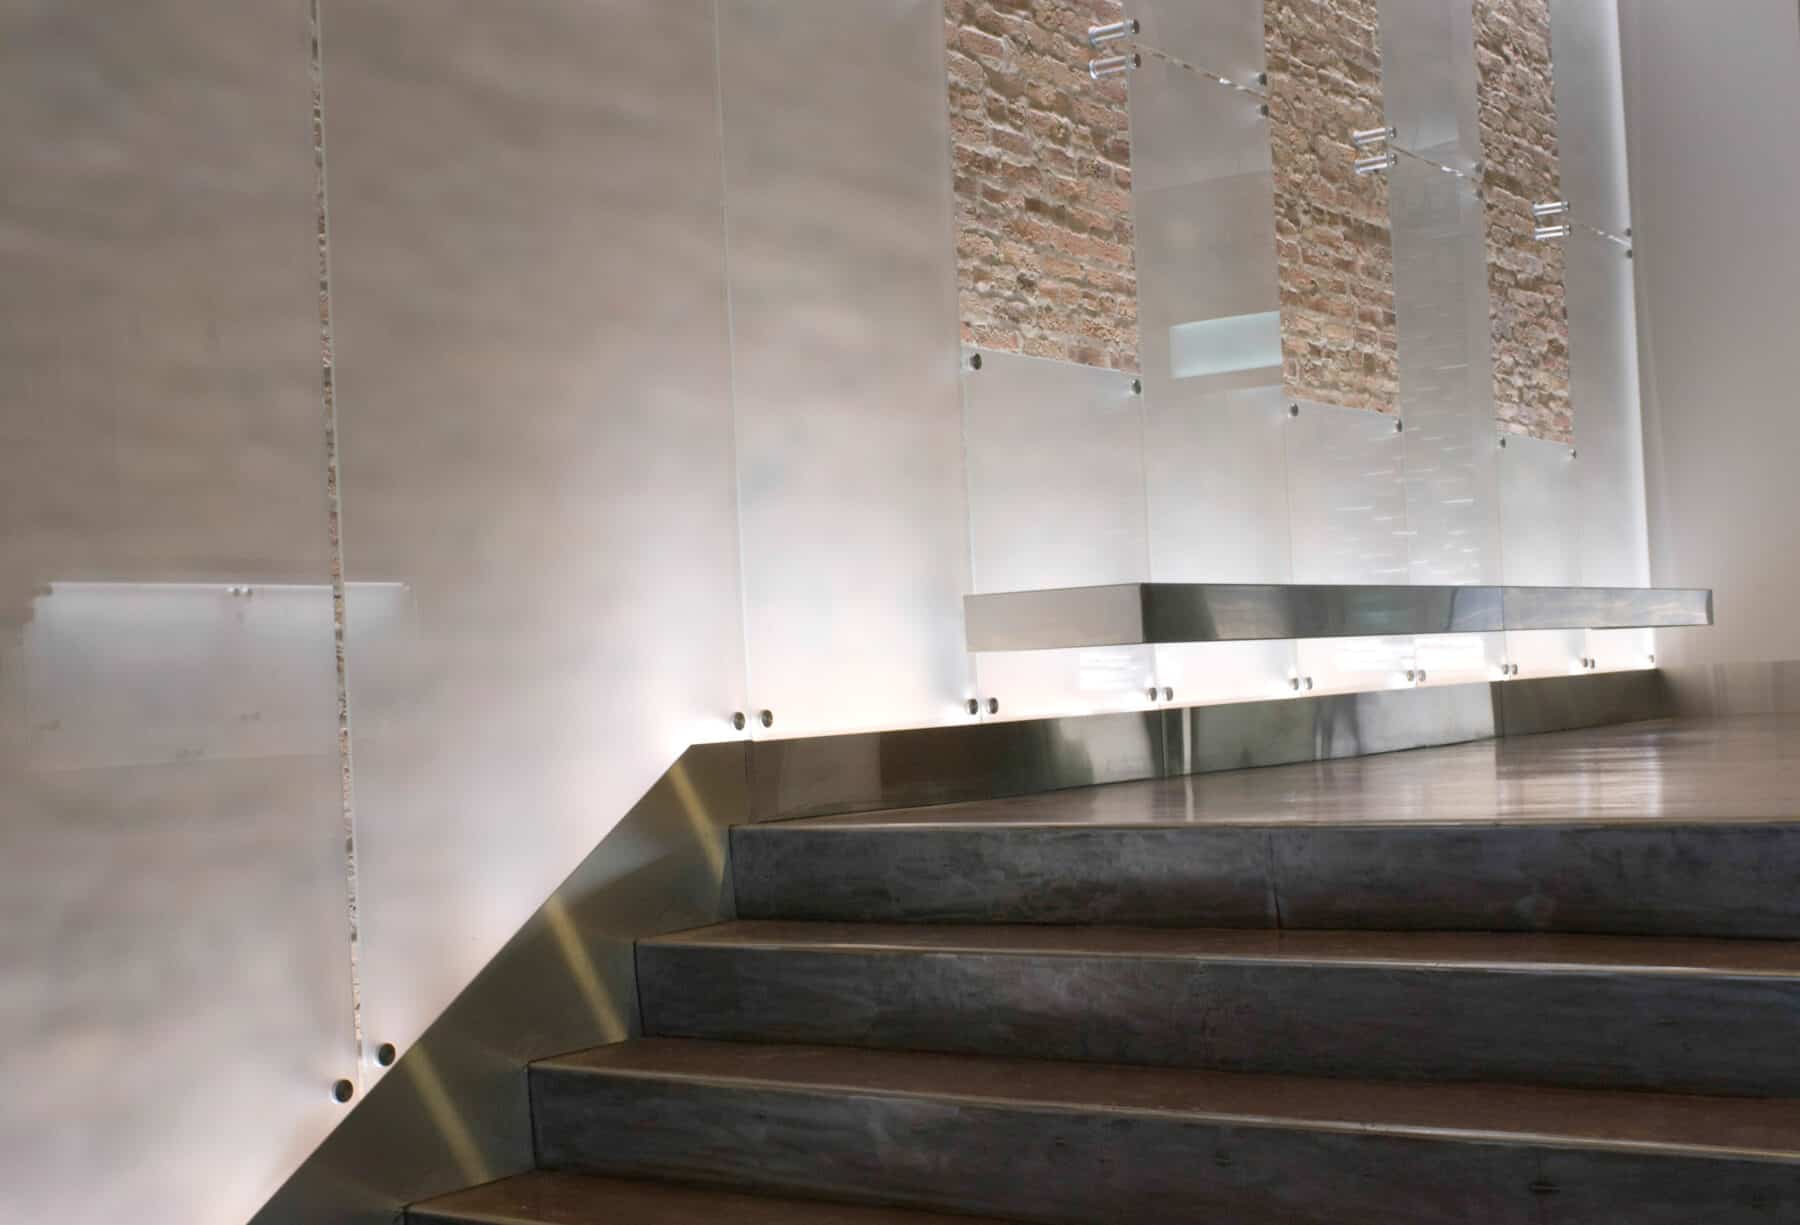 Custom Fabrication of Architectural Etched Glass Wall Panels with Special Metal Hardware with LED Lighting for Construction Specialty Projects by Commercial Builder & General Contractor Structural Enterprises